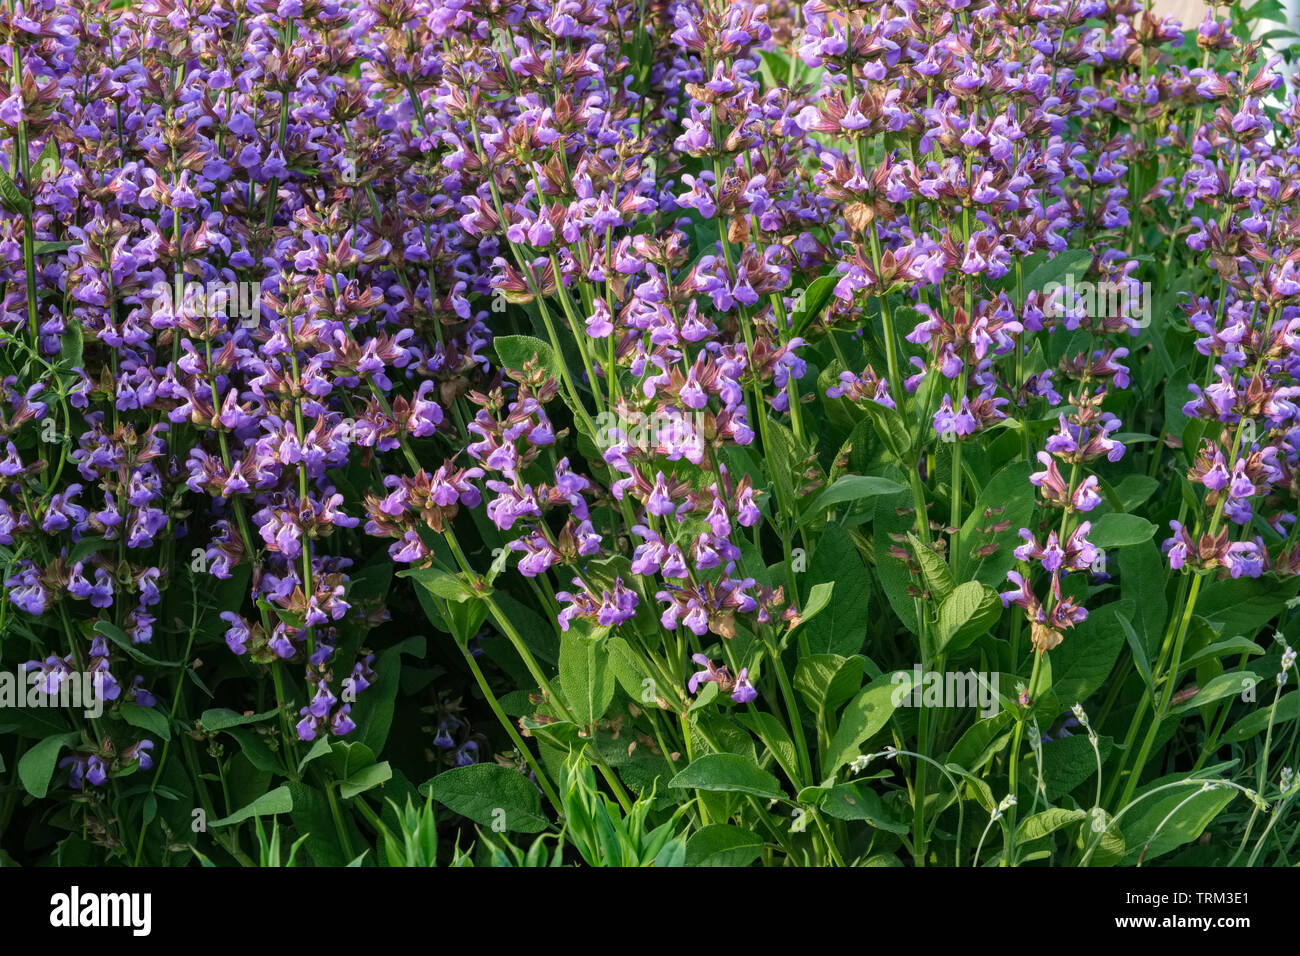 Pictures of sage flowers